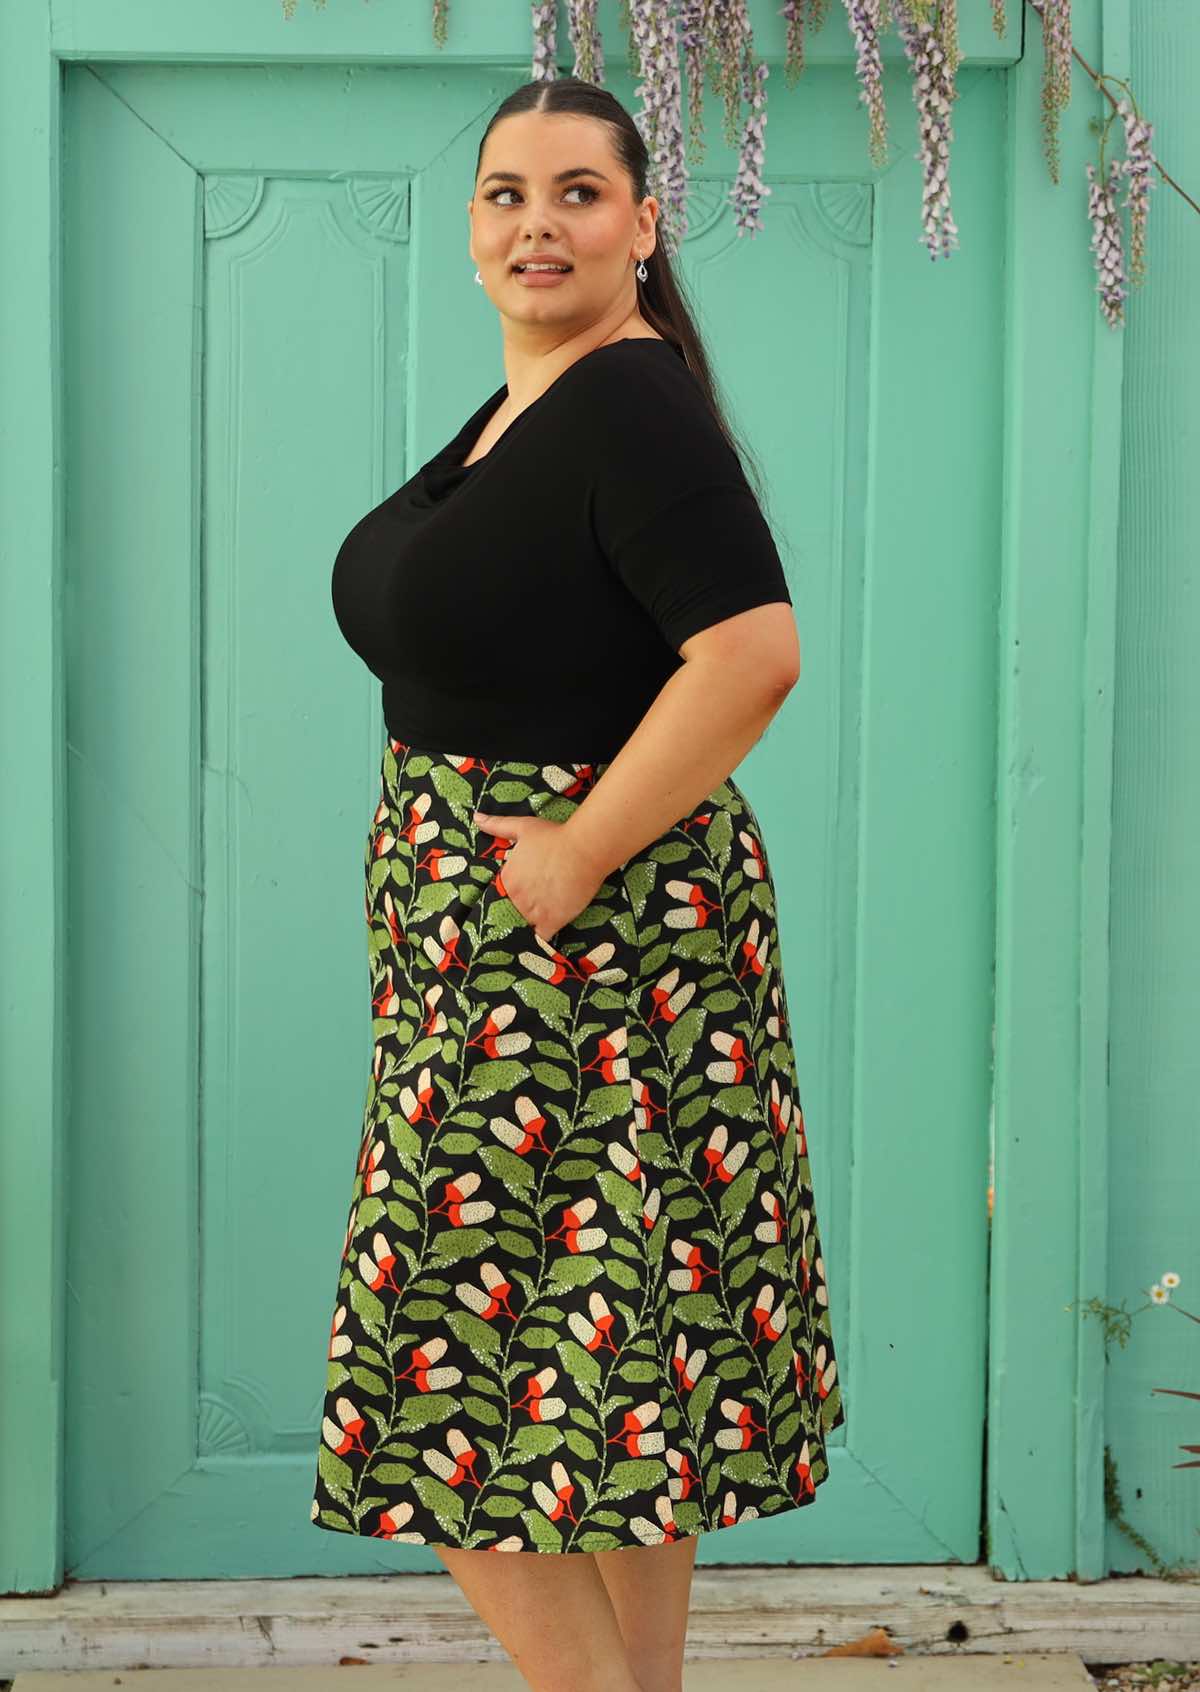 size 18 model wearing black retro style cotton skirt with pockets